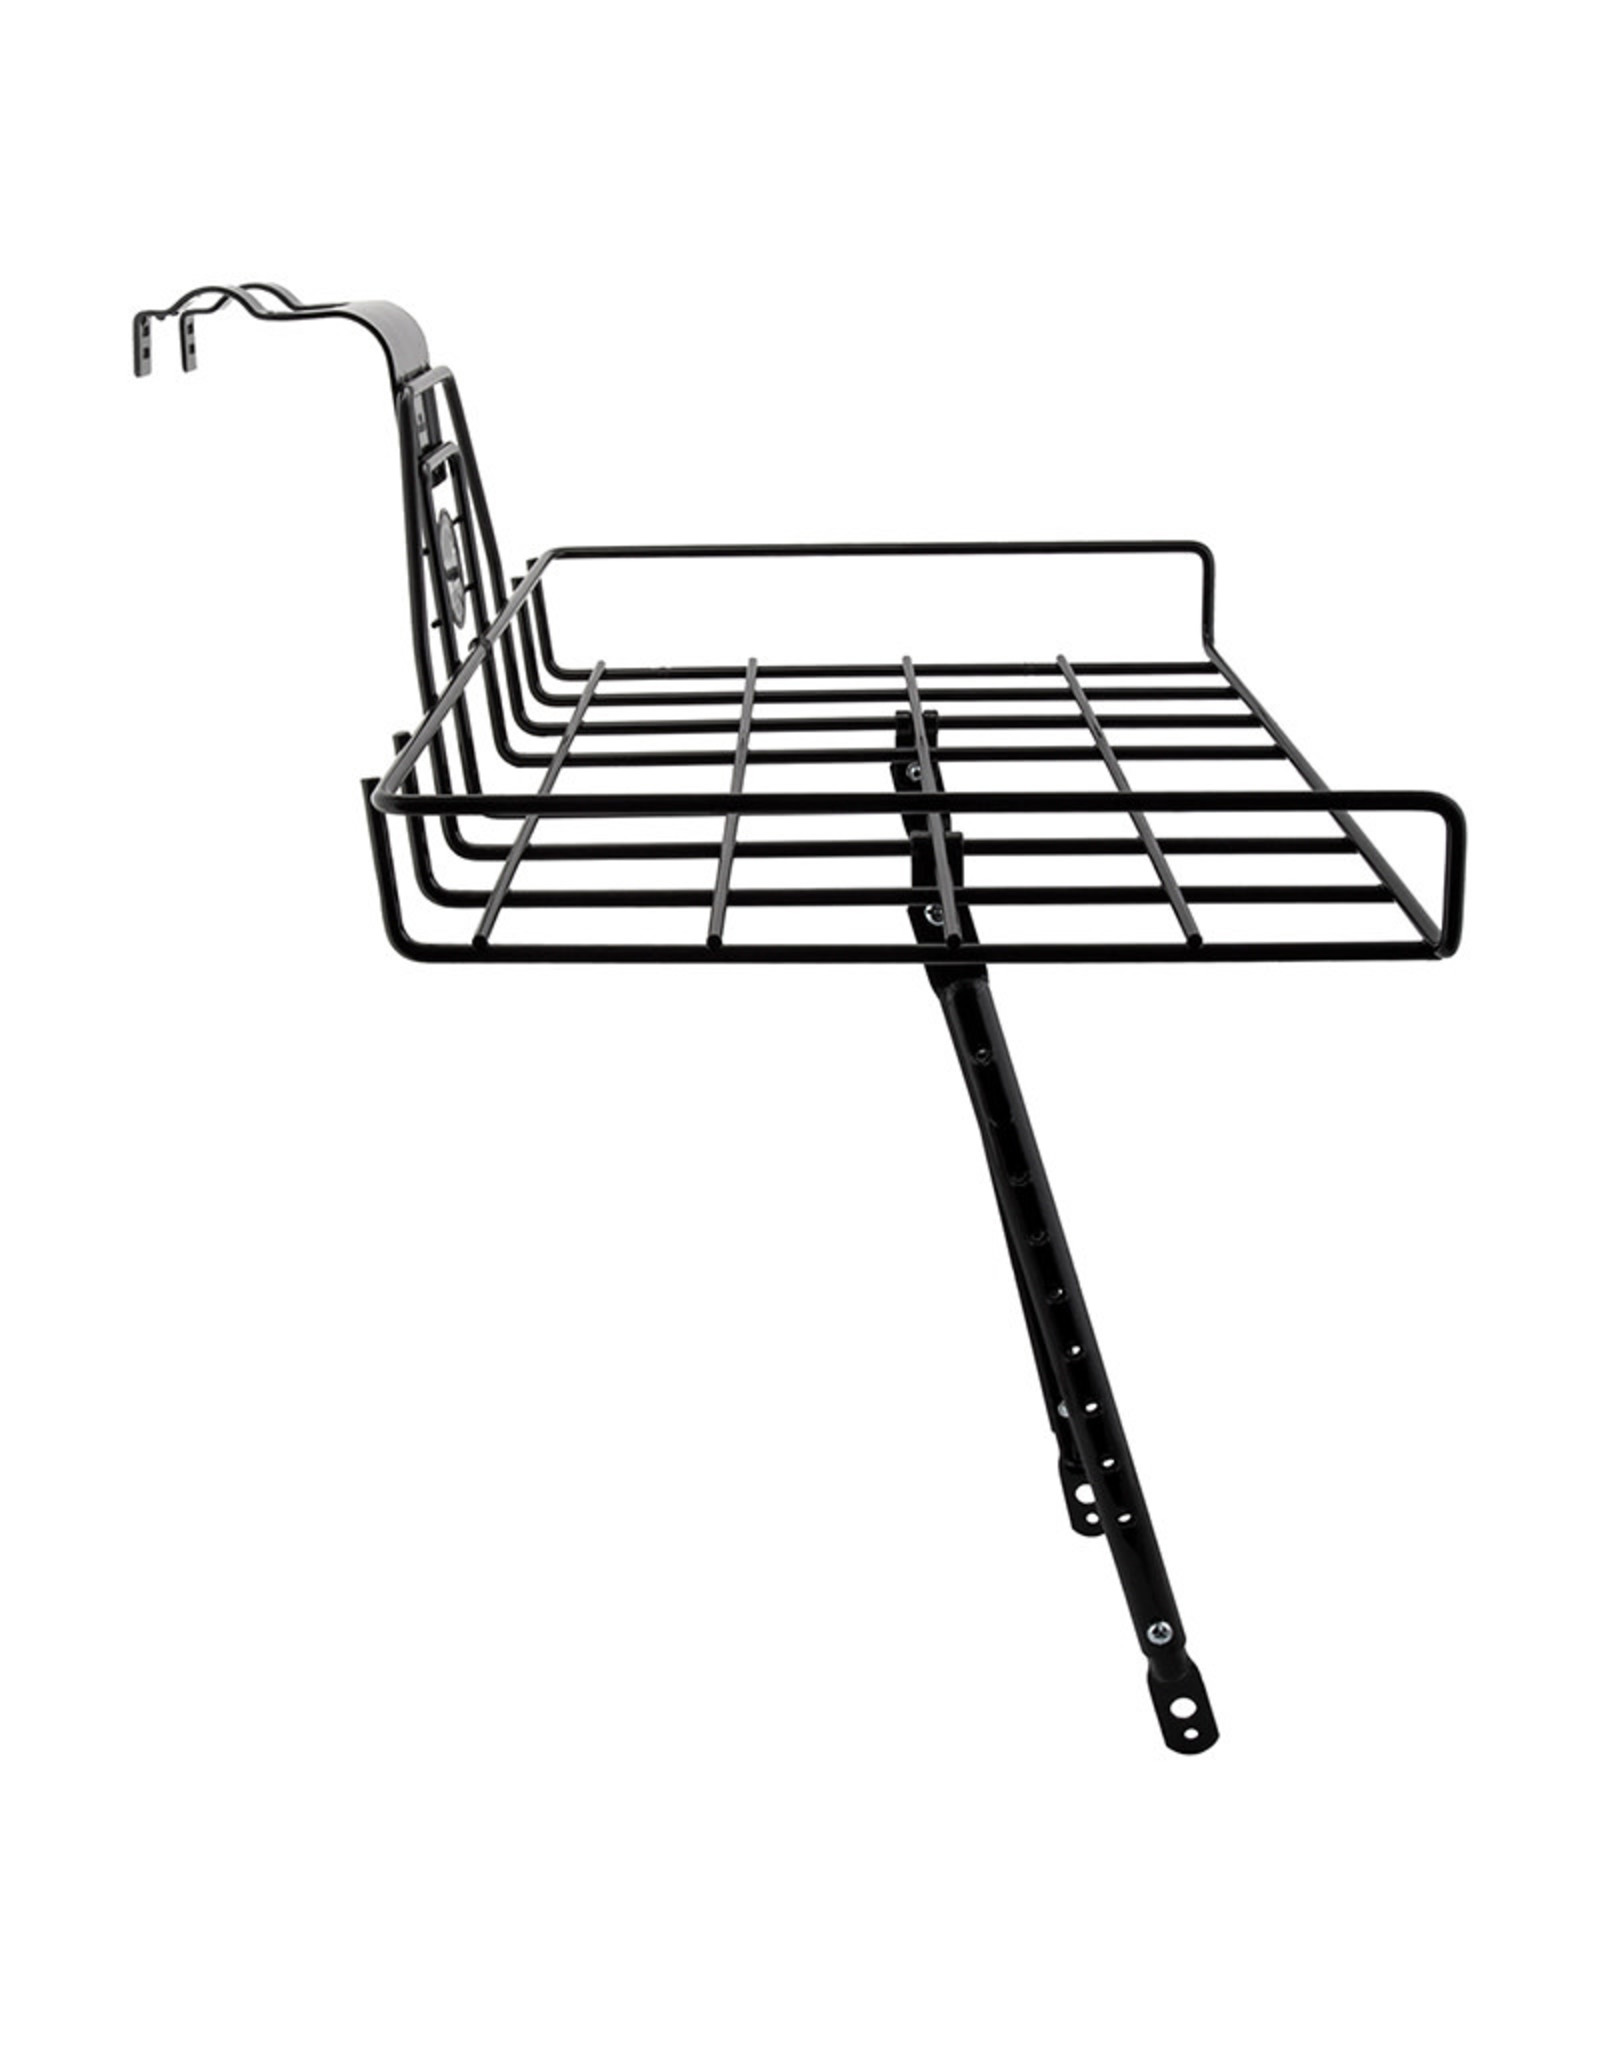 Wald Pizza RACK FronT 257GB STeeL BlacK - Firehouse Bicycles